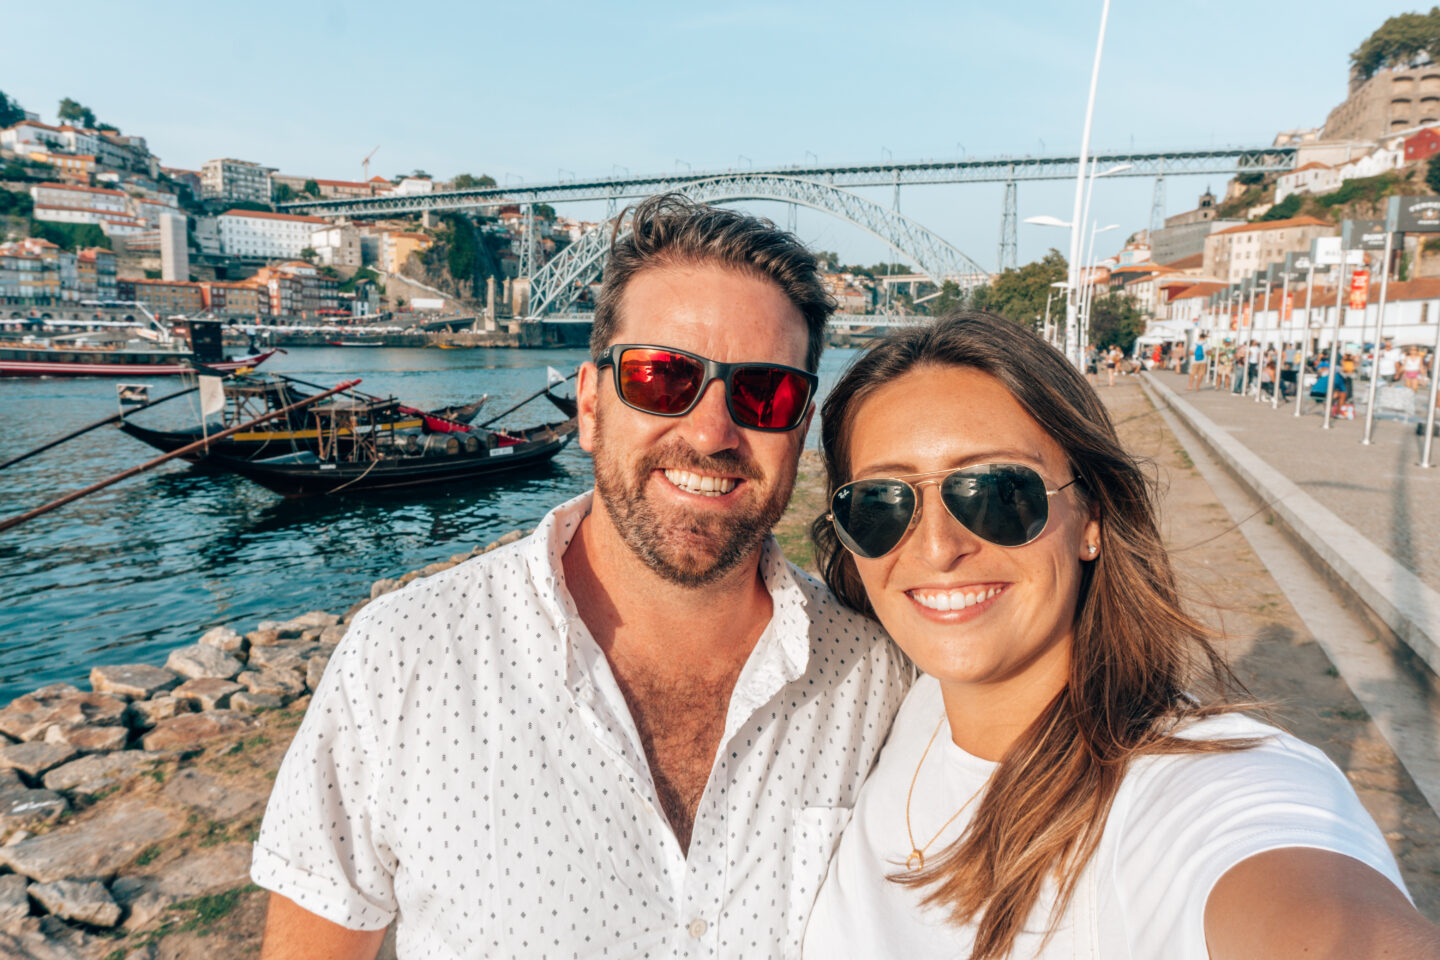 A couple wearing sunglasses take a selfie in front of the Dom Luís I Bridge in Porto, Portugal